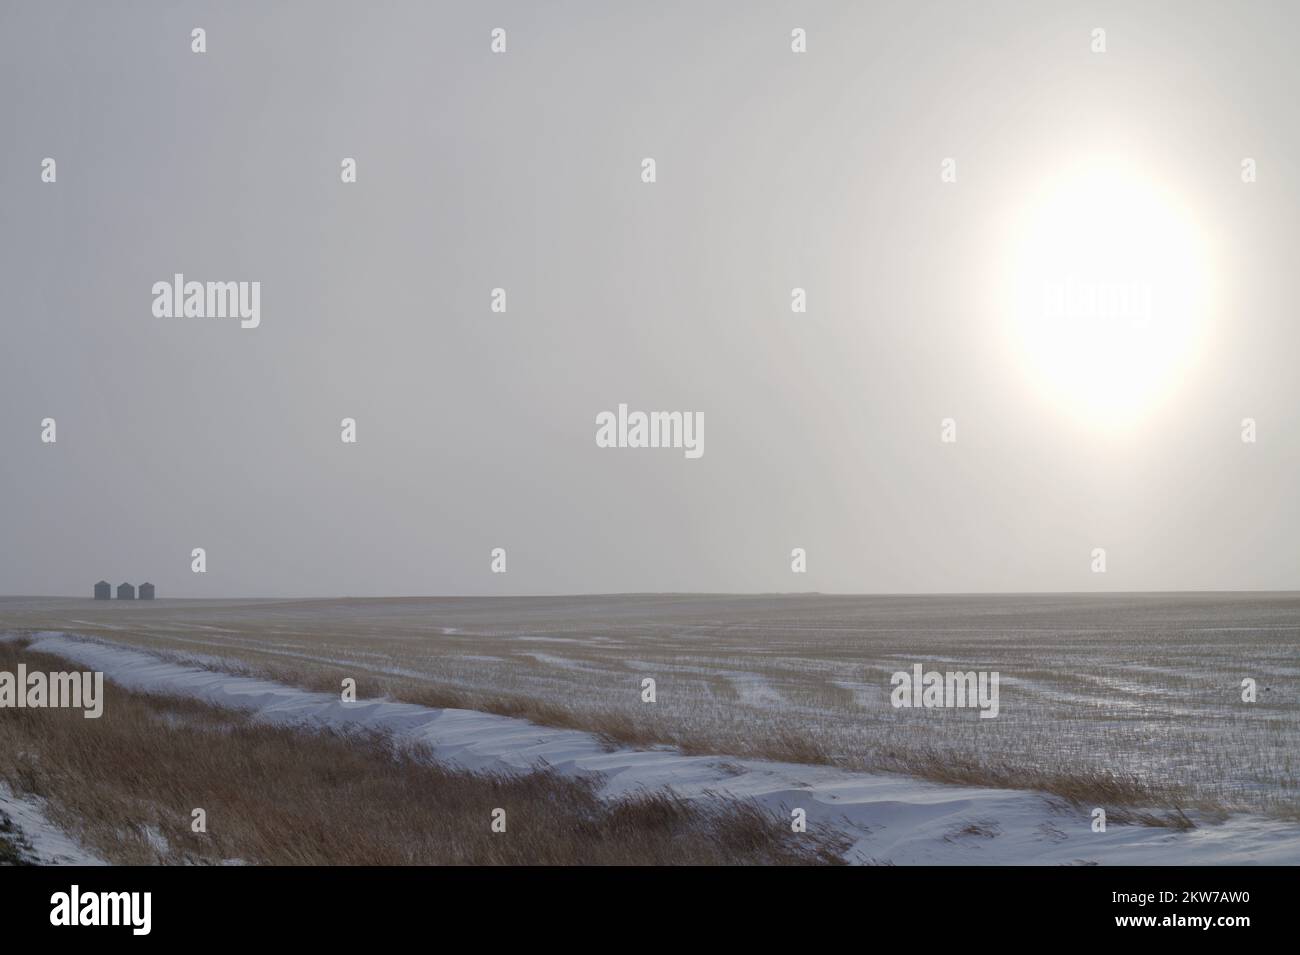 Three grain bins during a winter storm in the deep winter season of Western North Dakota. This image captures the isolated reality of agriculture. Stock Photo